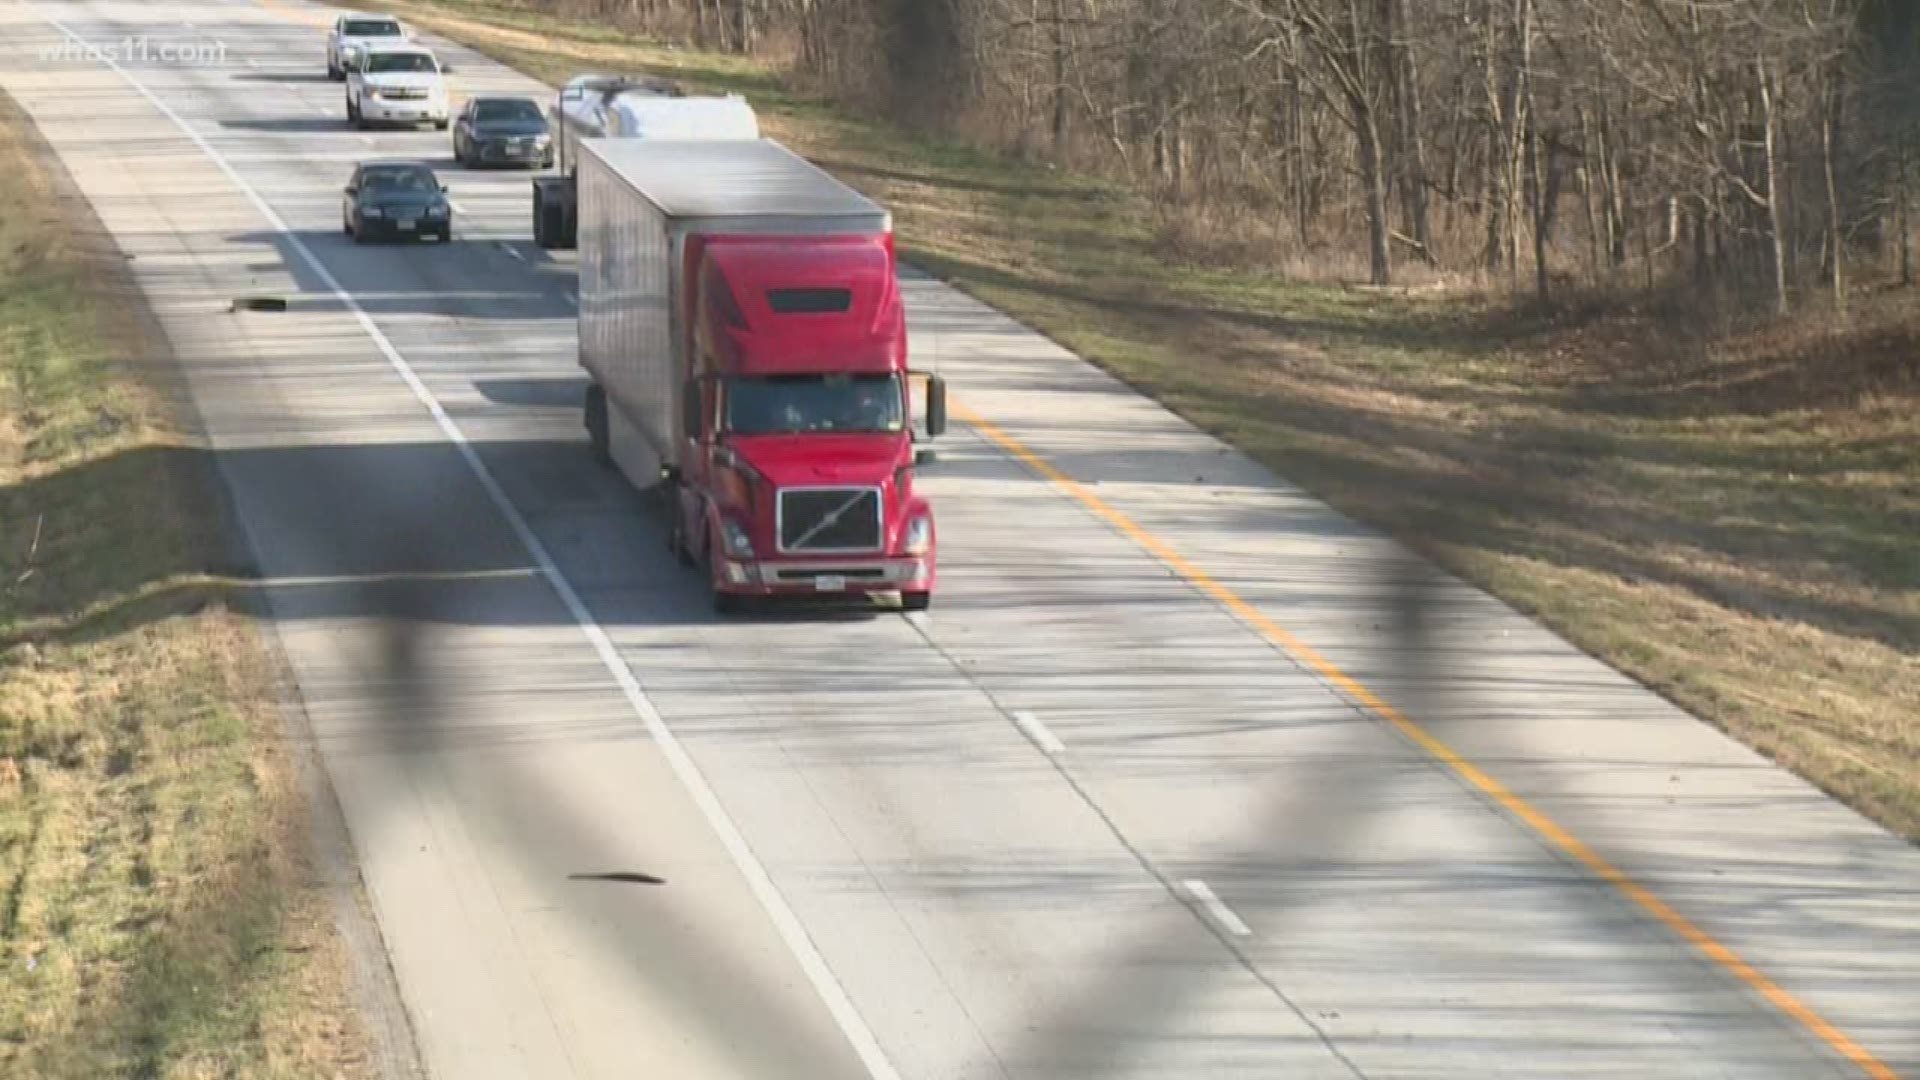 Children signaling truck drivers to blow their horns is a tradition that’s dying, according to truckers. But the salute means more to them than you might think.